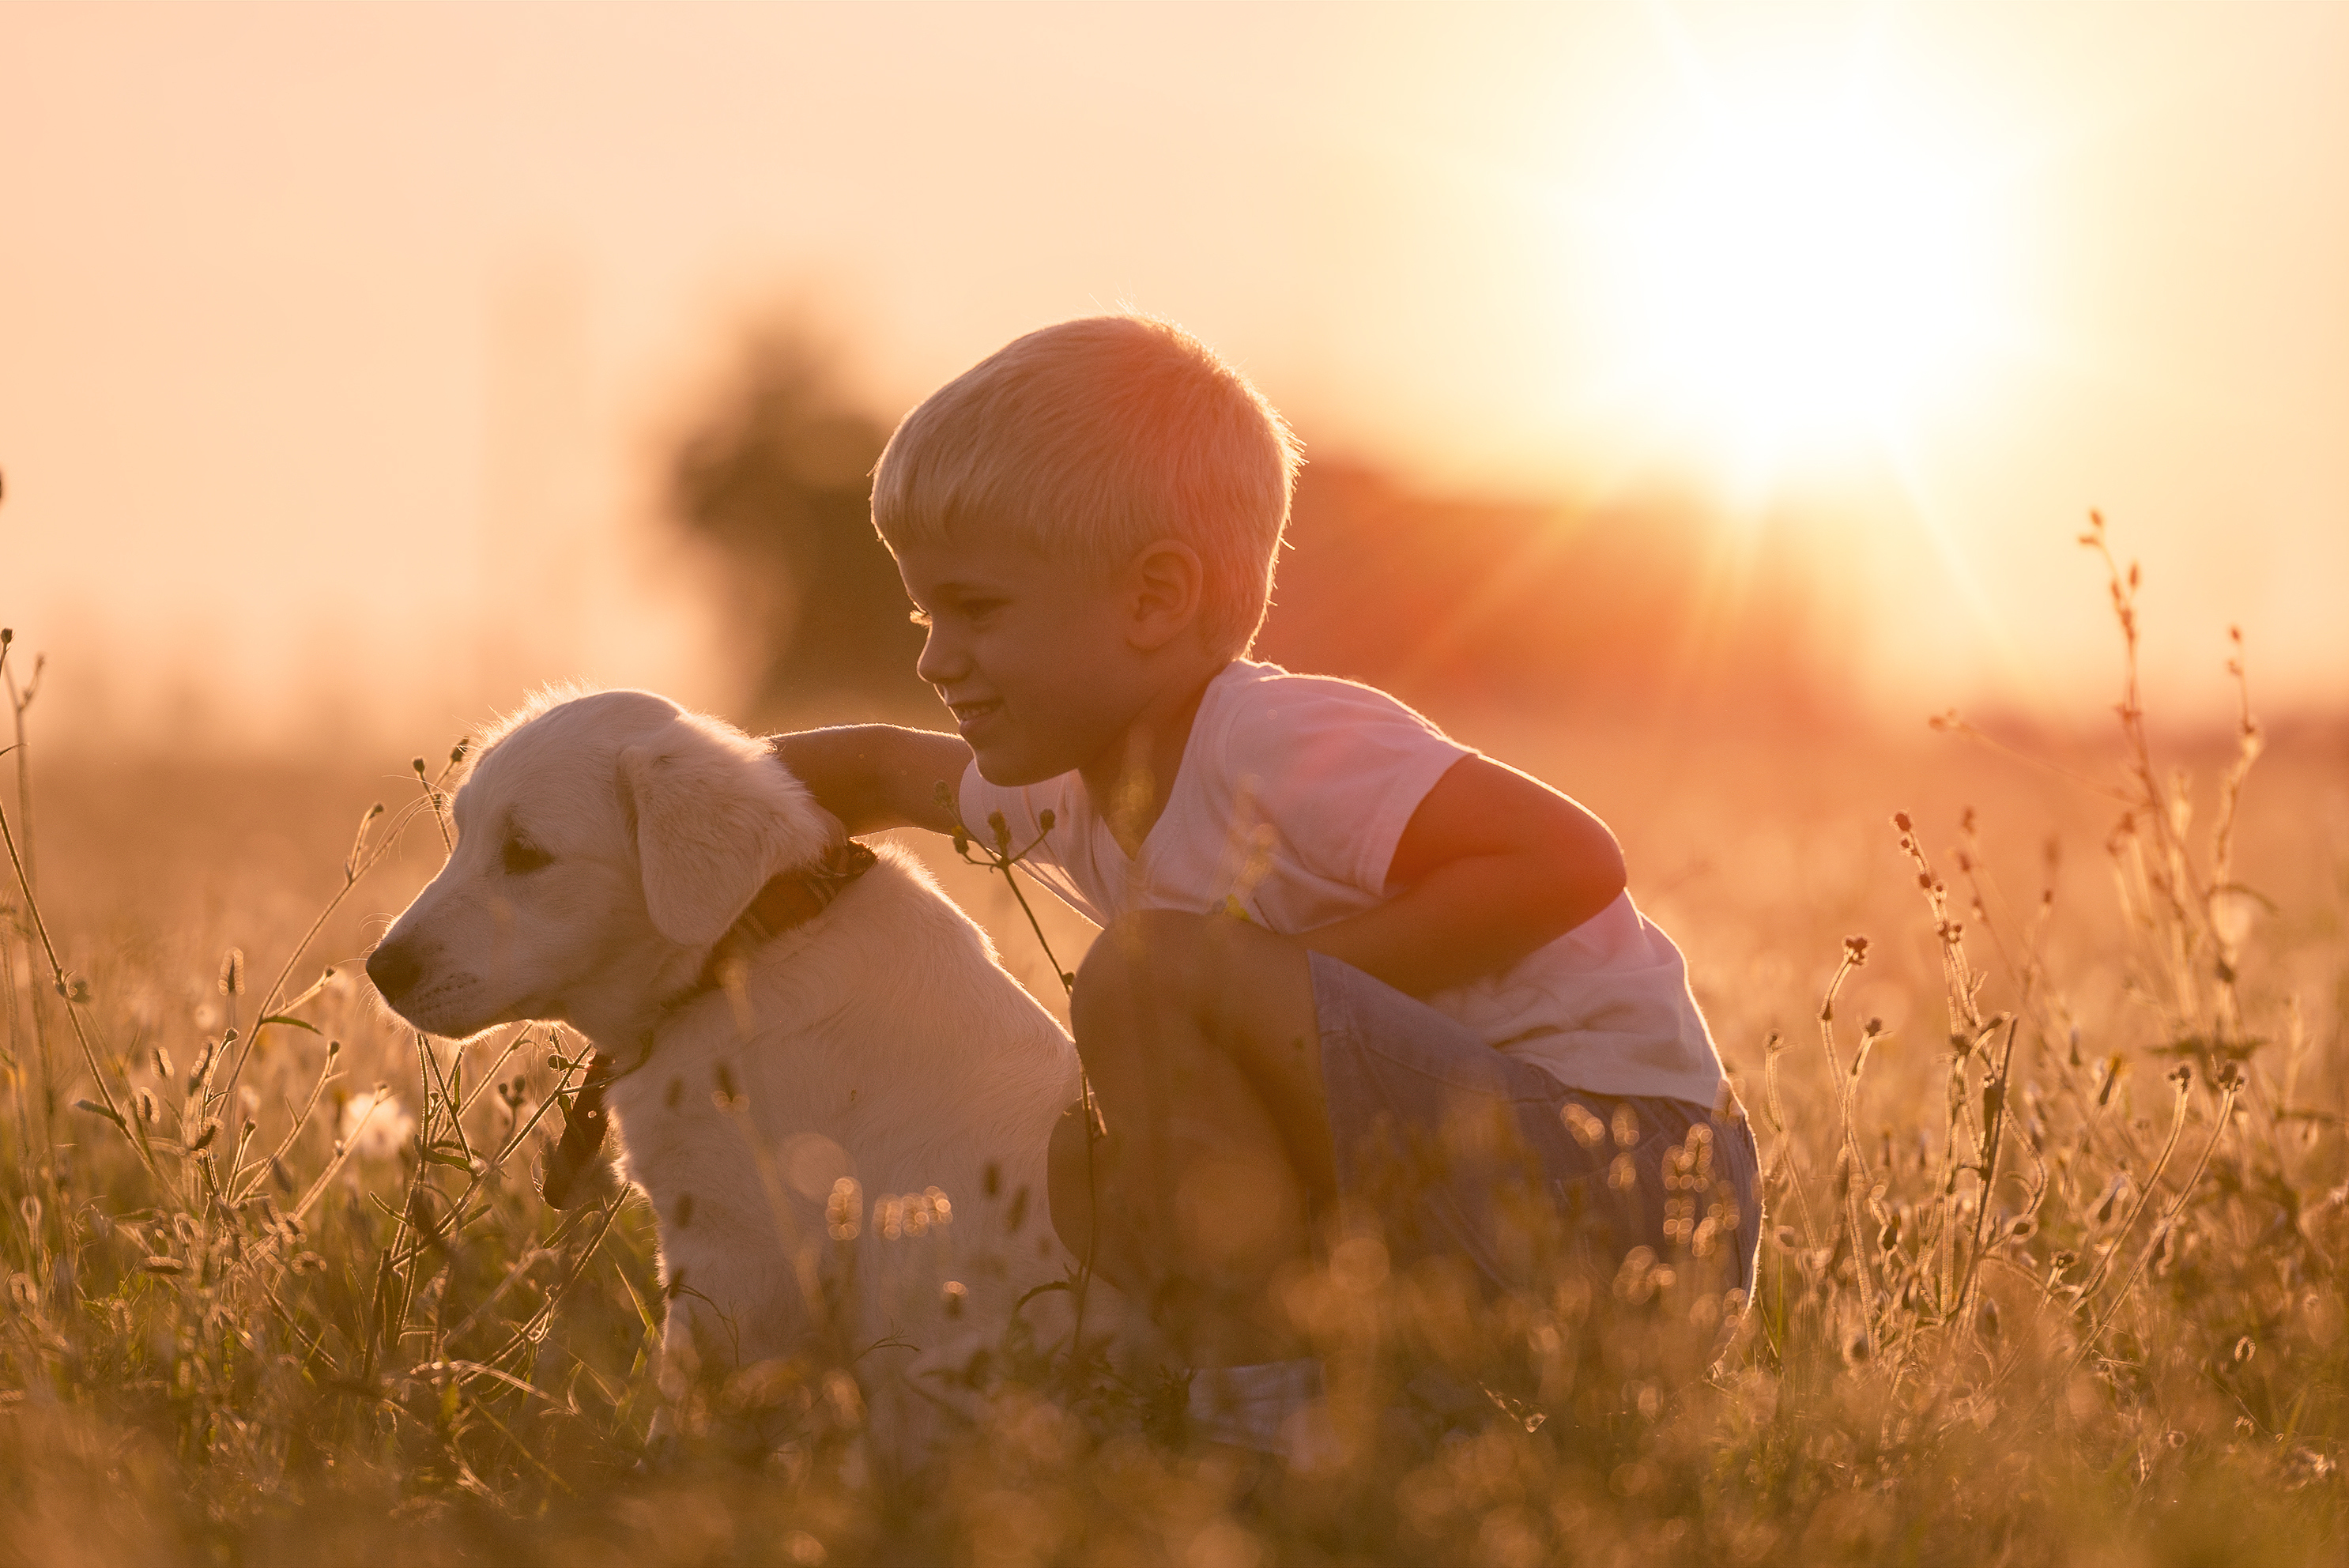 Young Child Boy Training Golden Retriever Puppy Dog in Meadow on Sunny Day (Thinkstock/PA)